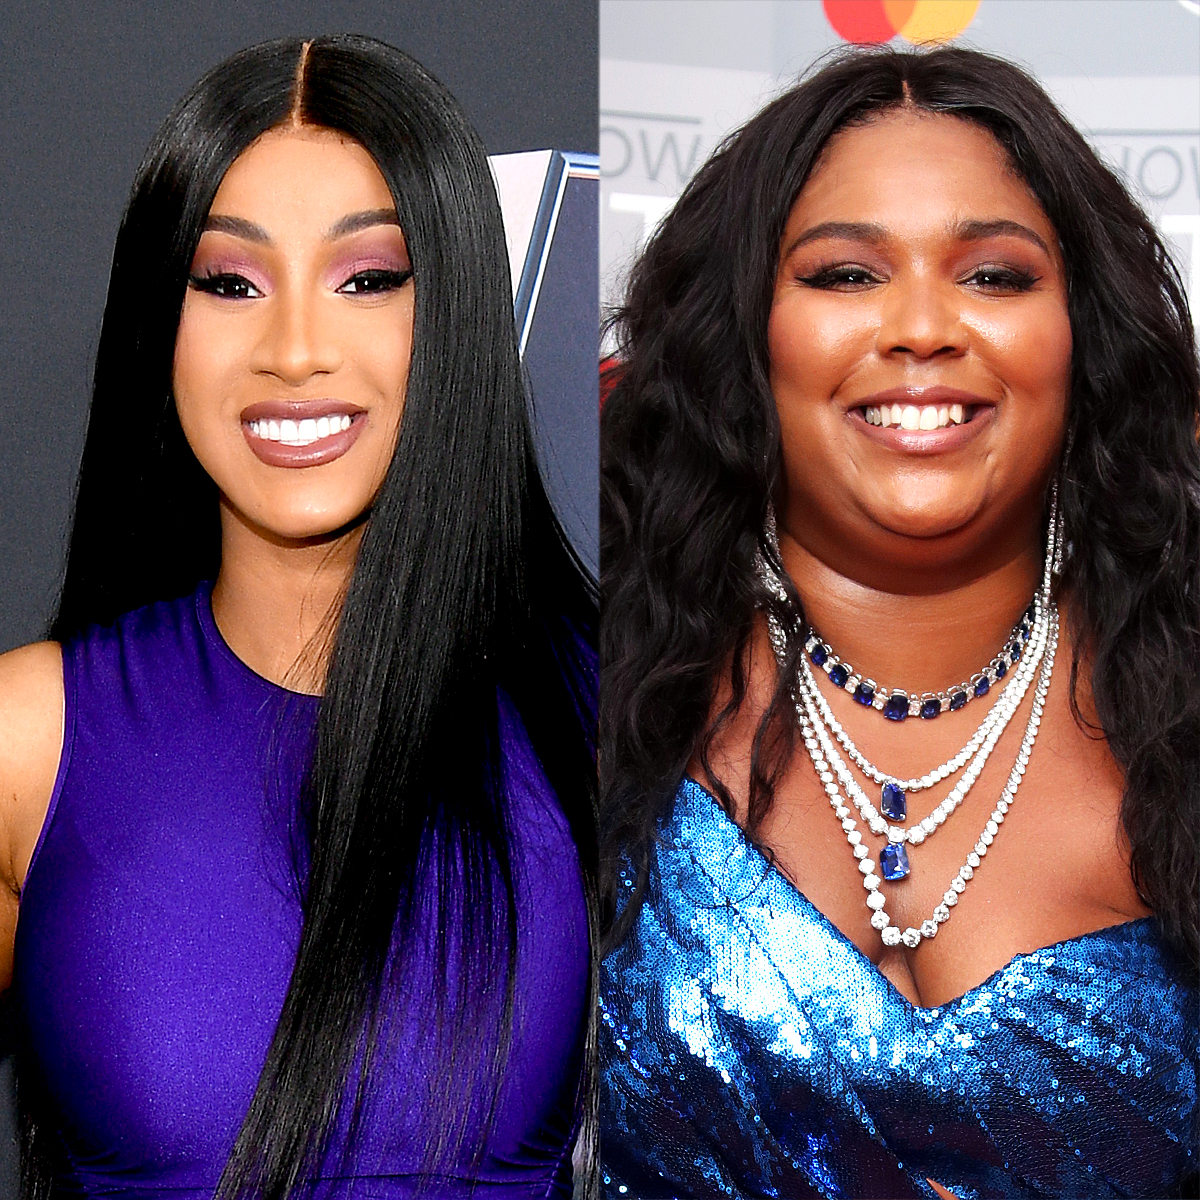 https://akns-images.eonline.com/eol_images/Entire_Site/2020816/rs_1200x1200-200916093528-1200-Cardi-B-Lizzo.jpg?fit=around%7C1080:1080&output-quality=90&crop=1080:1080;center,top